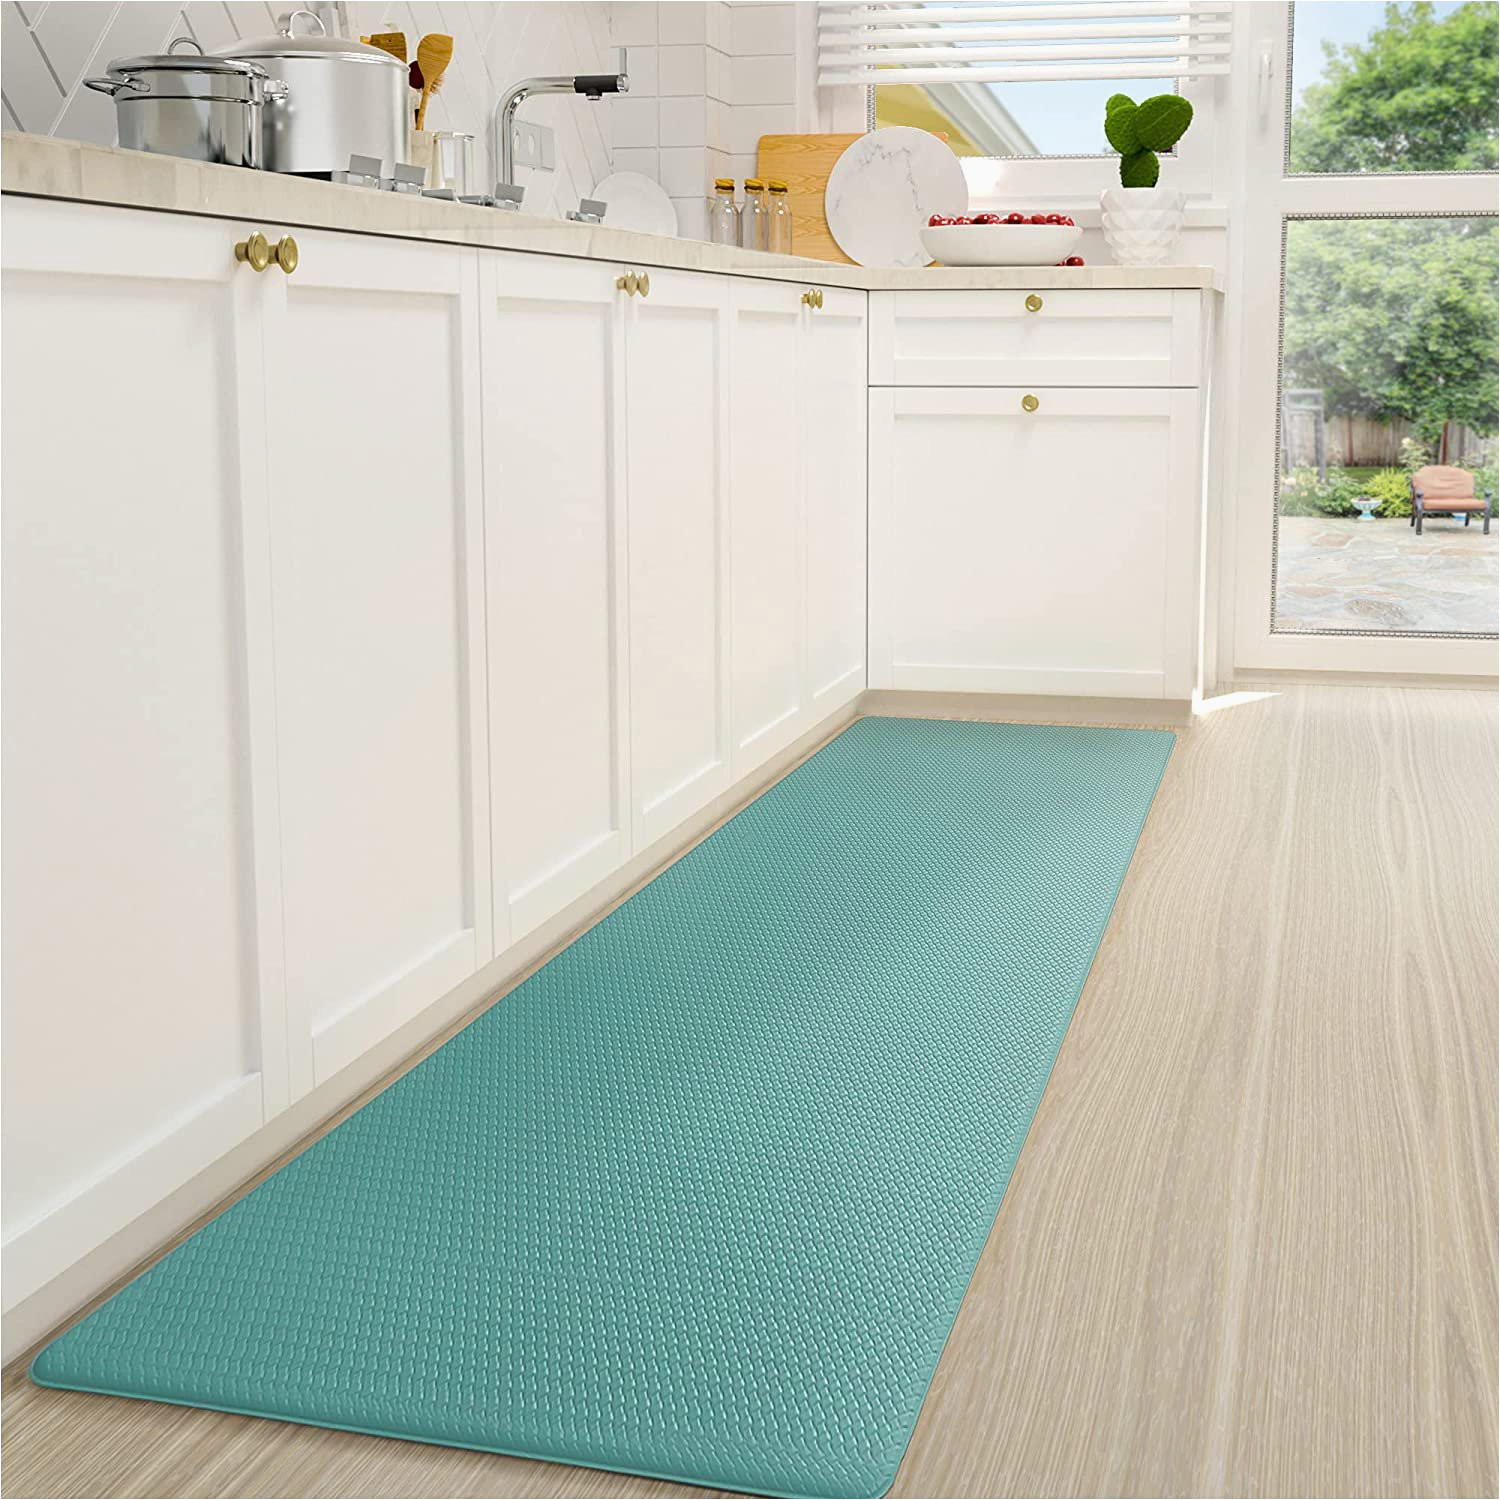 Teal Blue Kitchen Rugs Luoheng Color G Kitchen Rugs, Kitchen Runner Rug Kitchen Floor Mat …